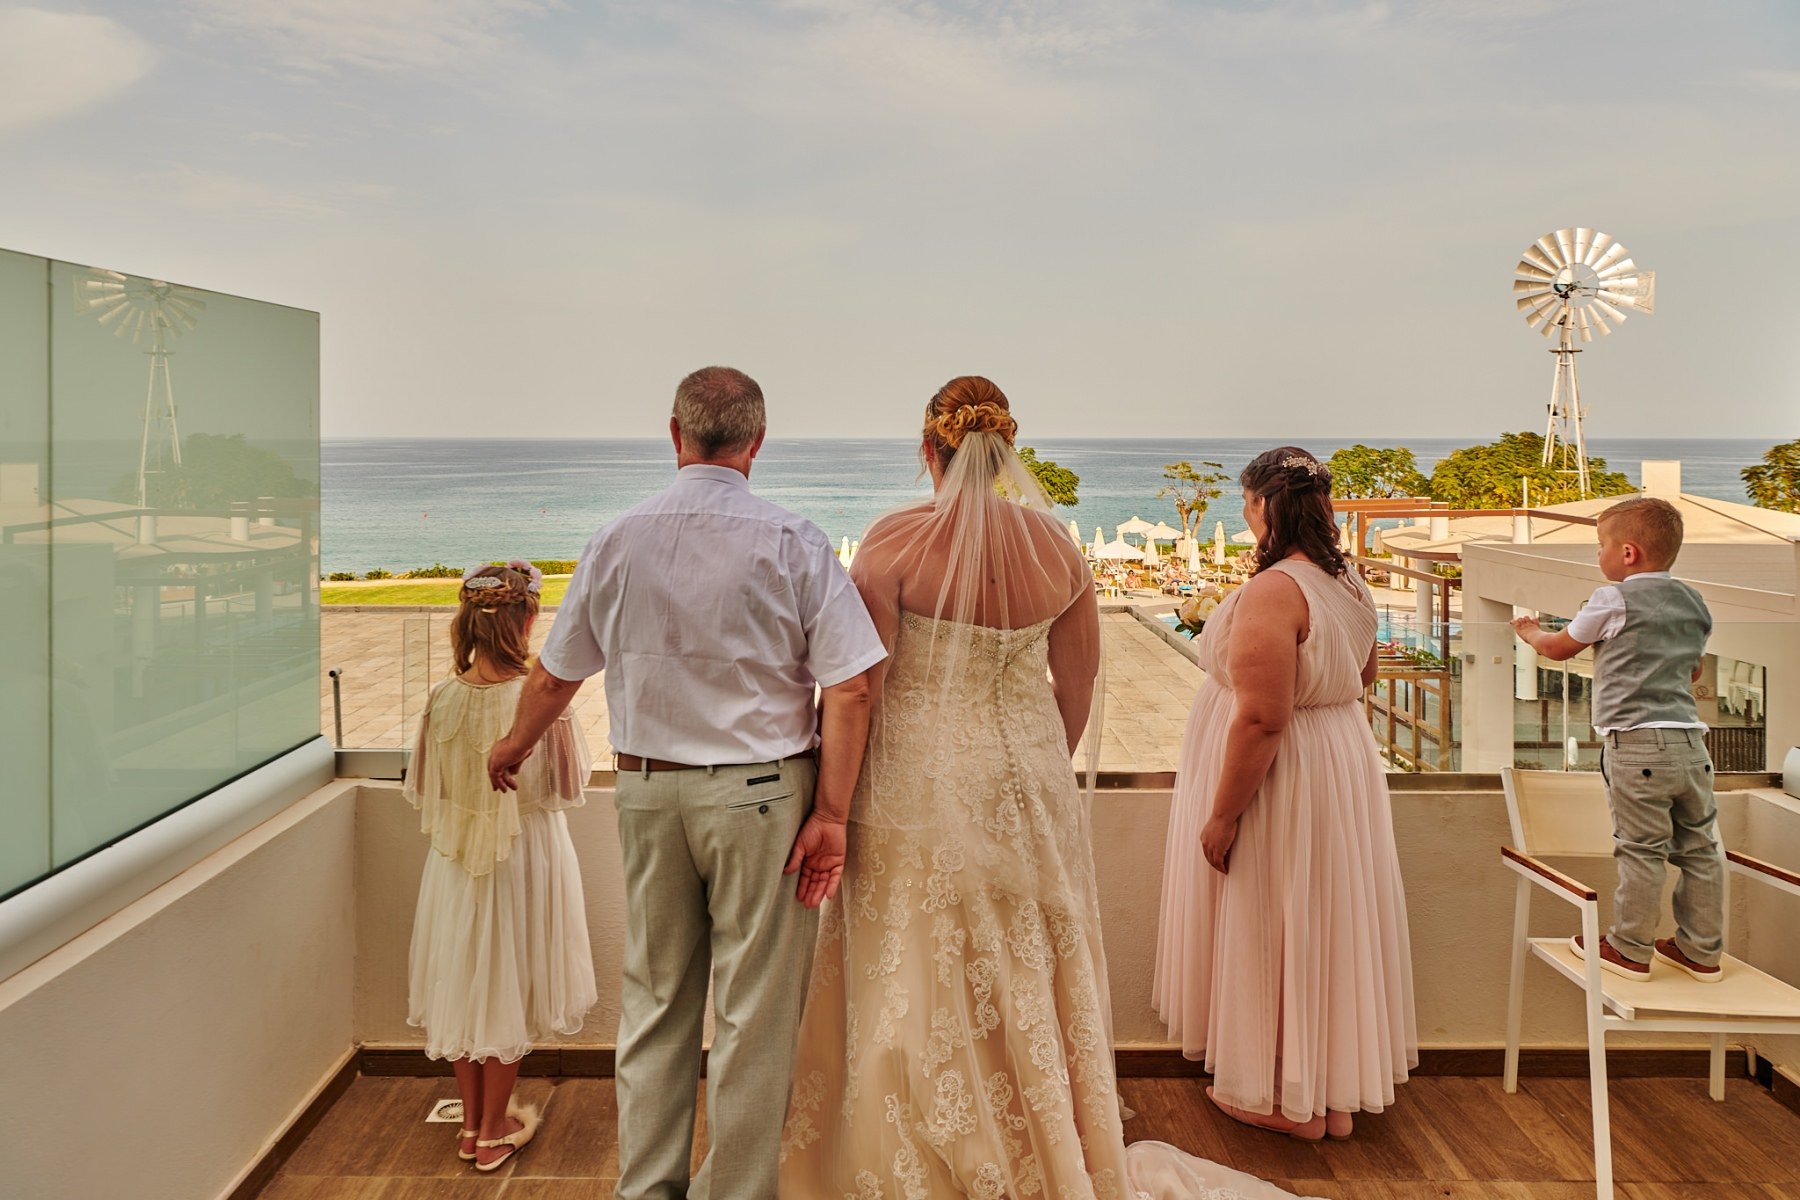 The wedding of Natalie and Steve at the Pernera Beach Hotel in Protaras